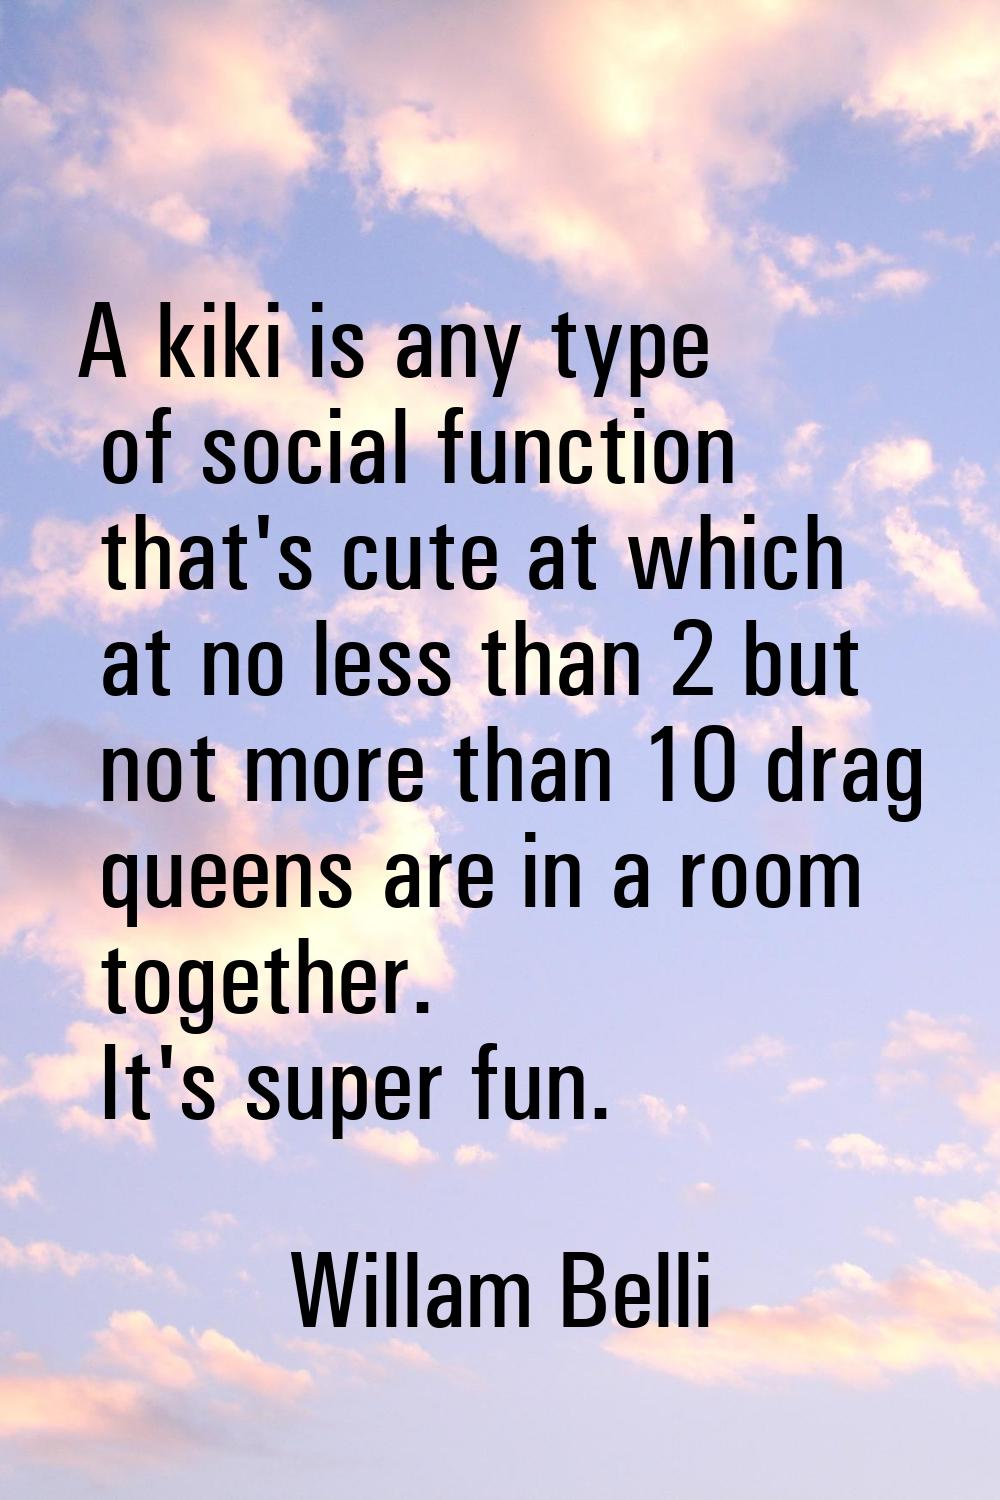 A kiki is any type of social function that's cute at which at no less than 2 but not more than 10 d